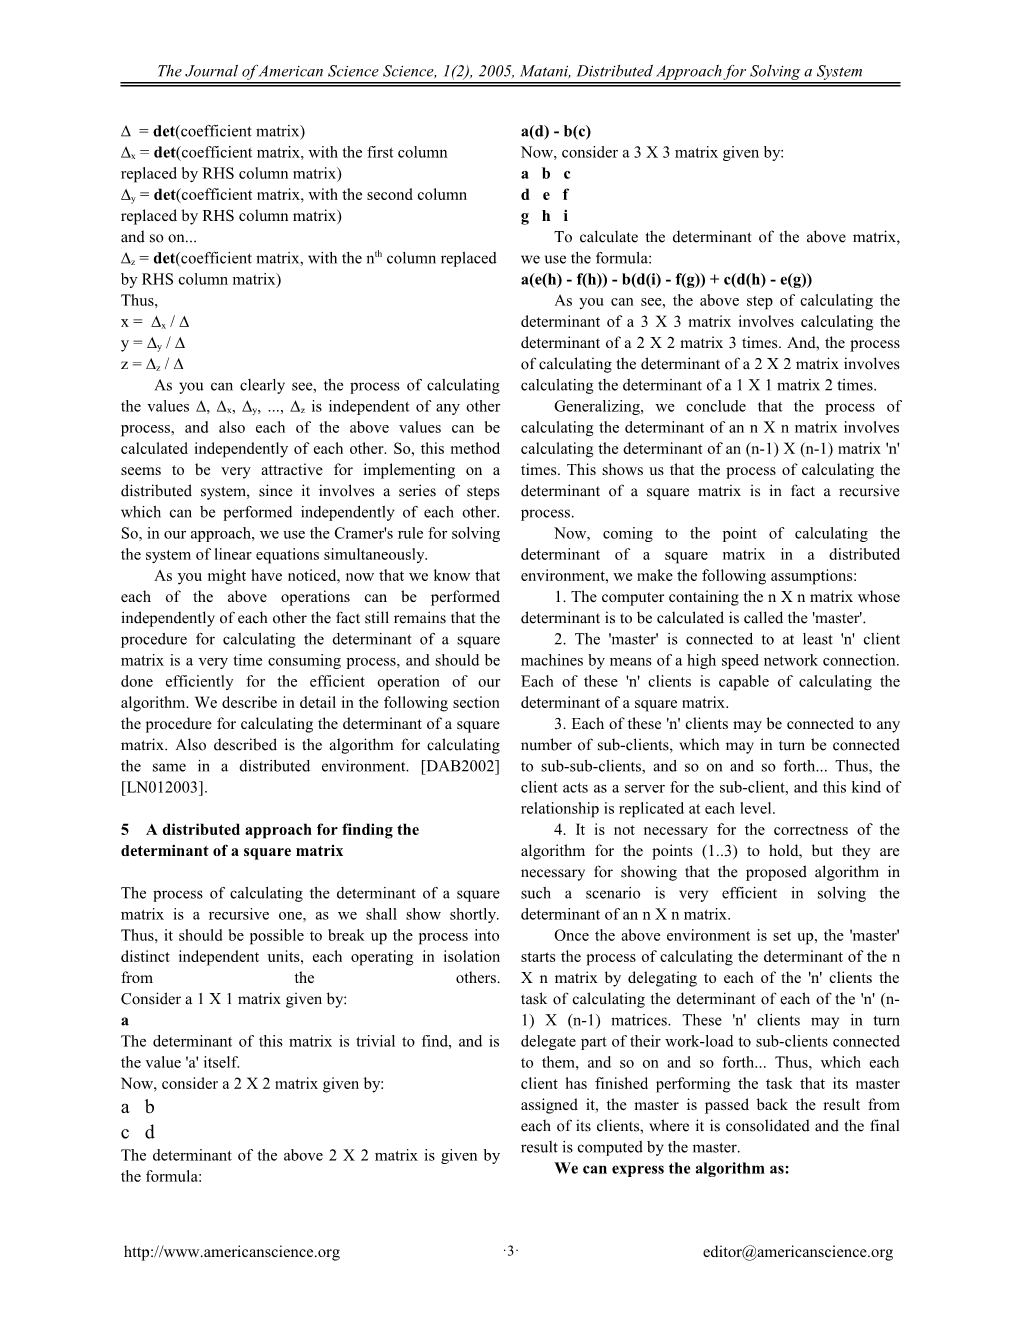 Distributed Approach for Solving a System of Linear Equations